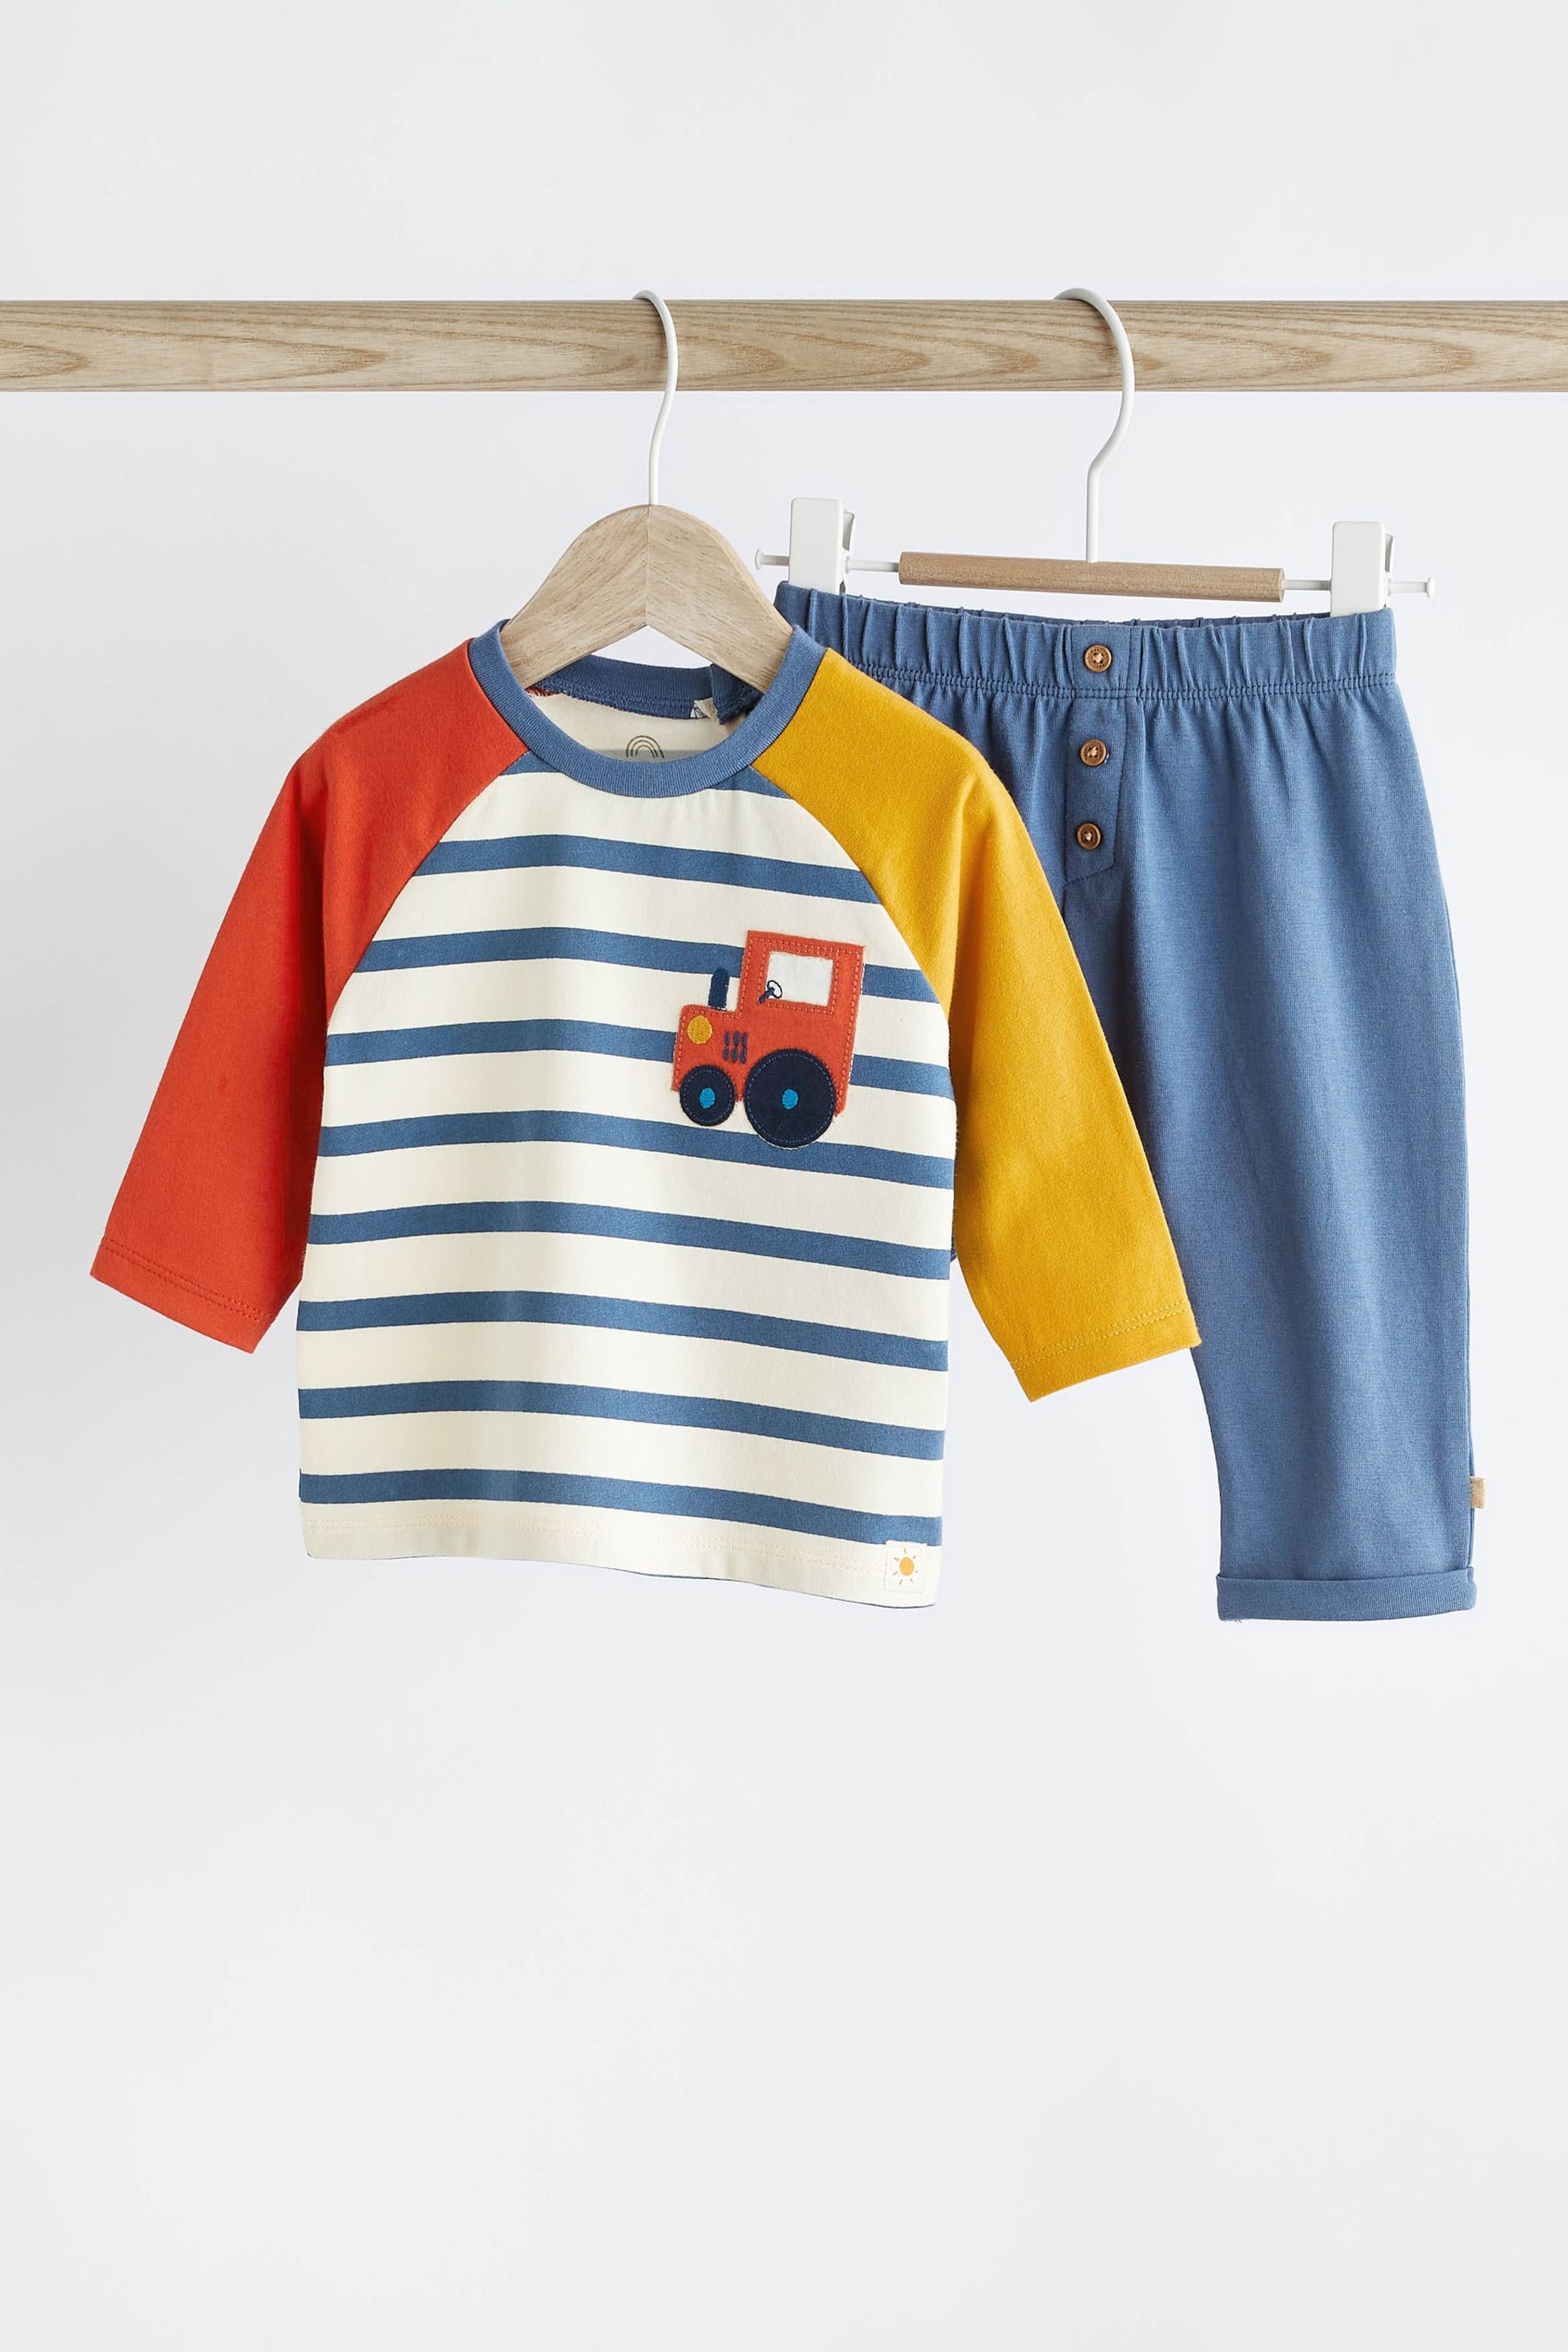 Blue Tractor Baby Top and Leggings 2 Piece Set - Image 1 of 9